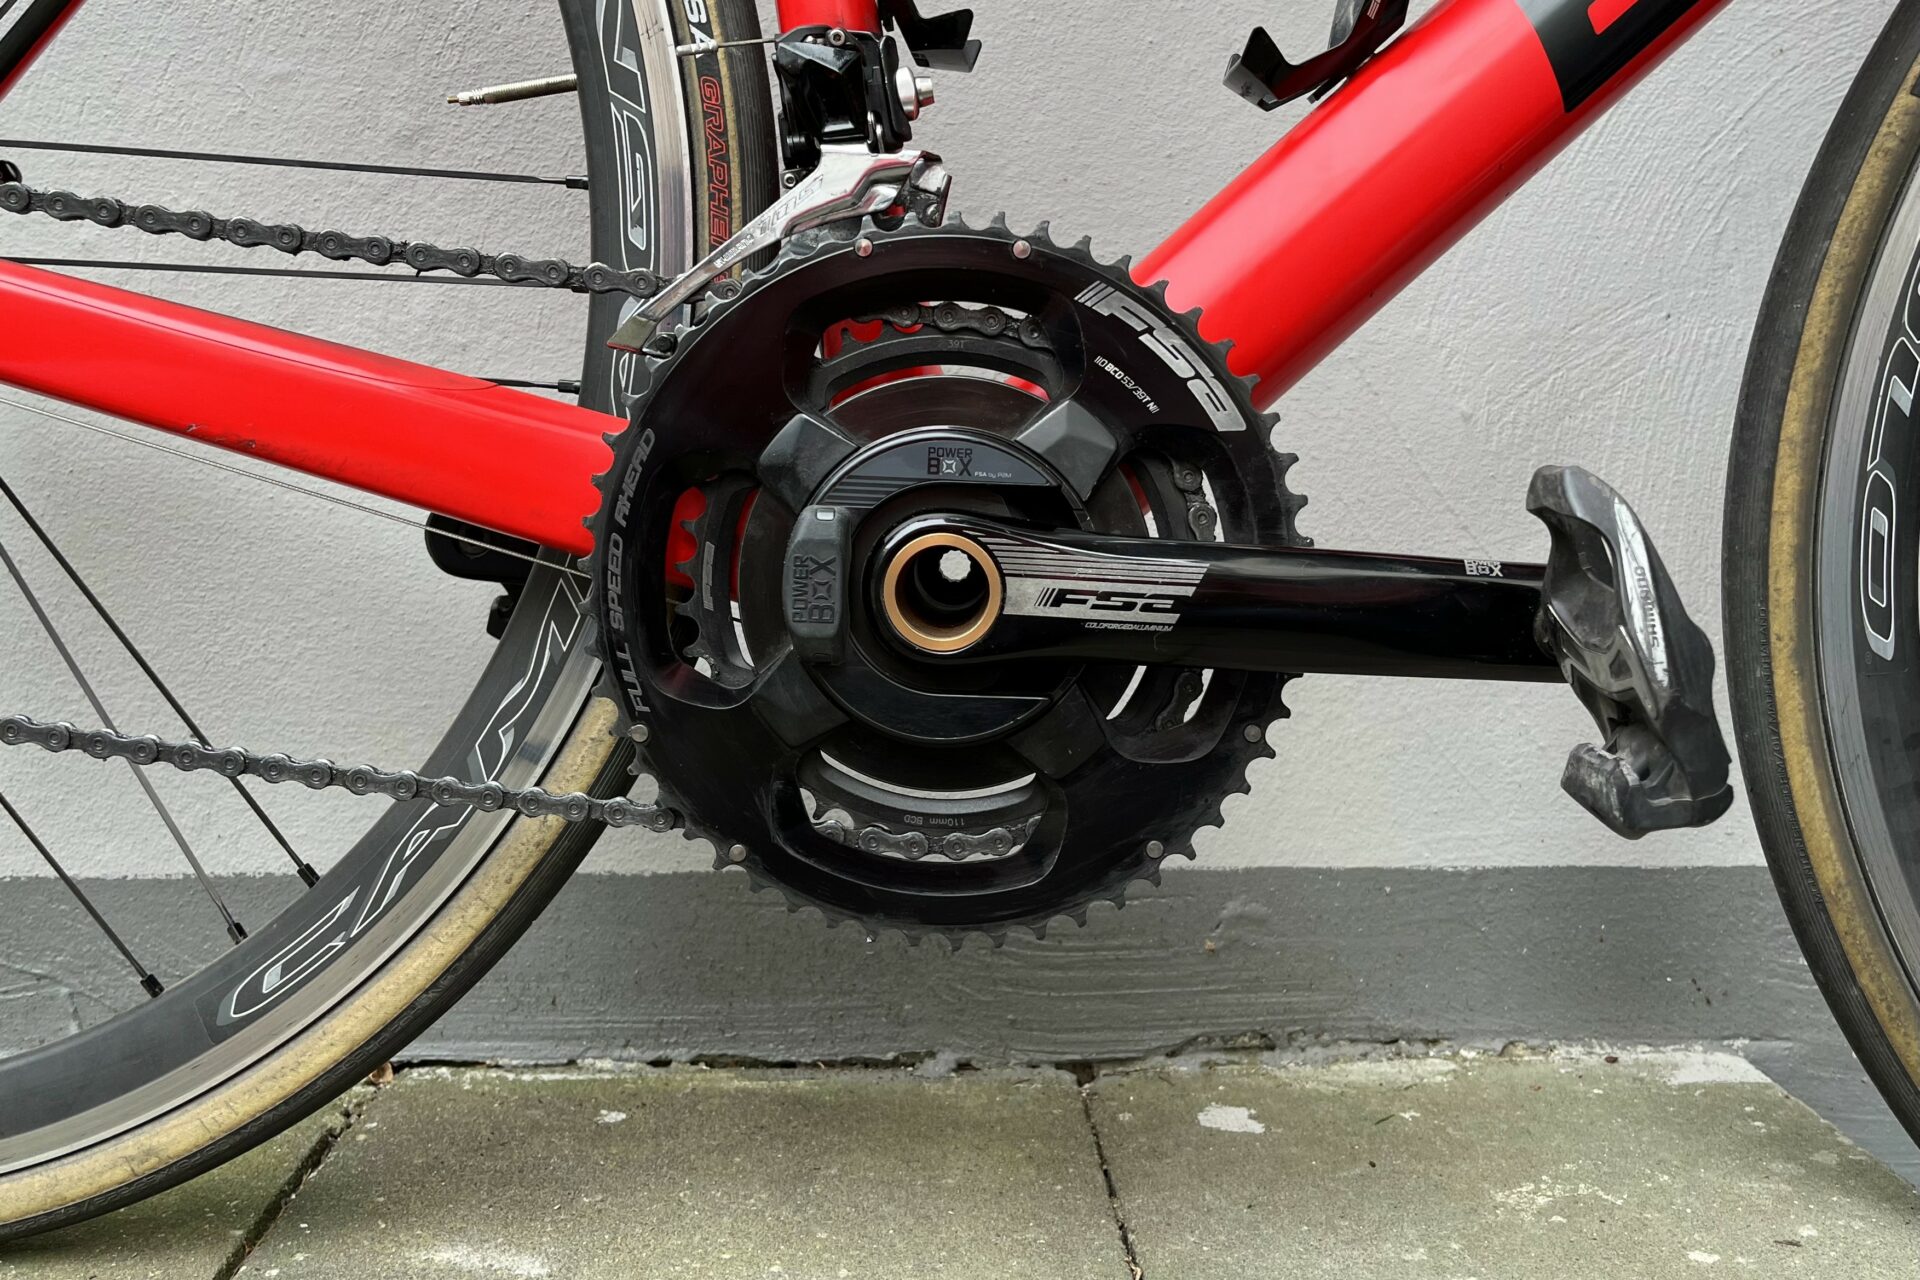 In front of a white and grey wall stands a red BMC road bike, equipped with an FSA Powerbox crank-based power meter, the best power meter on the market in terms of accuracy and reliability.